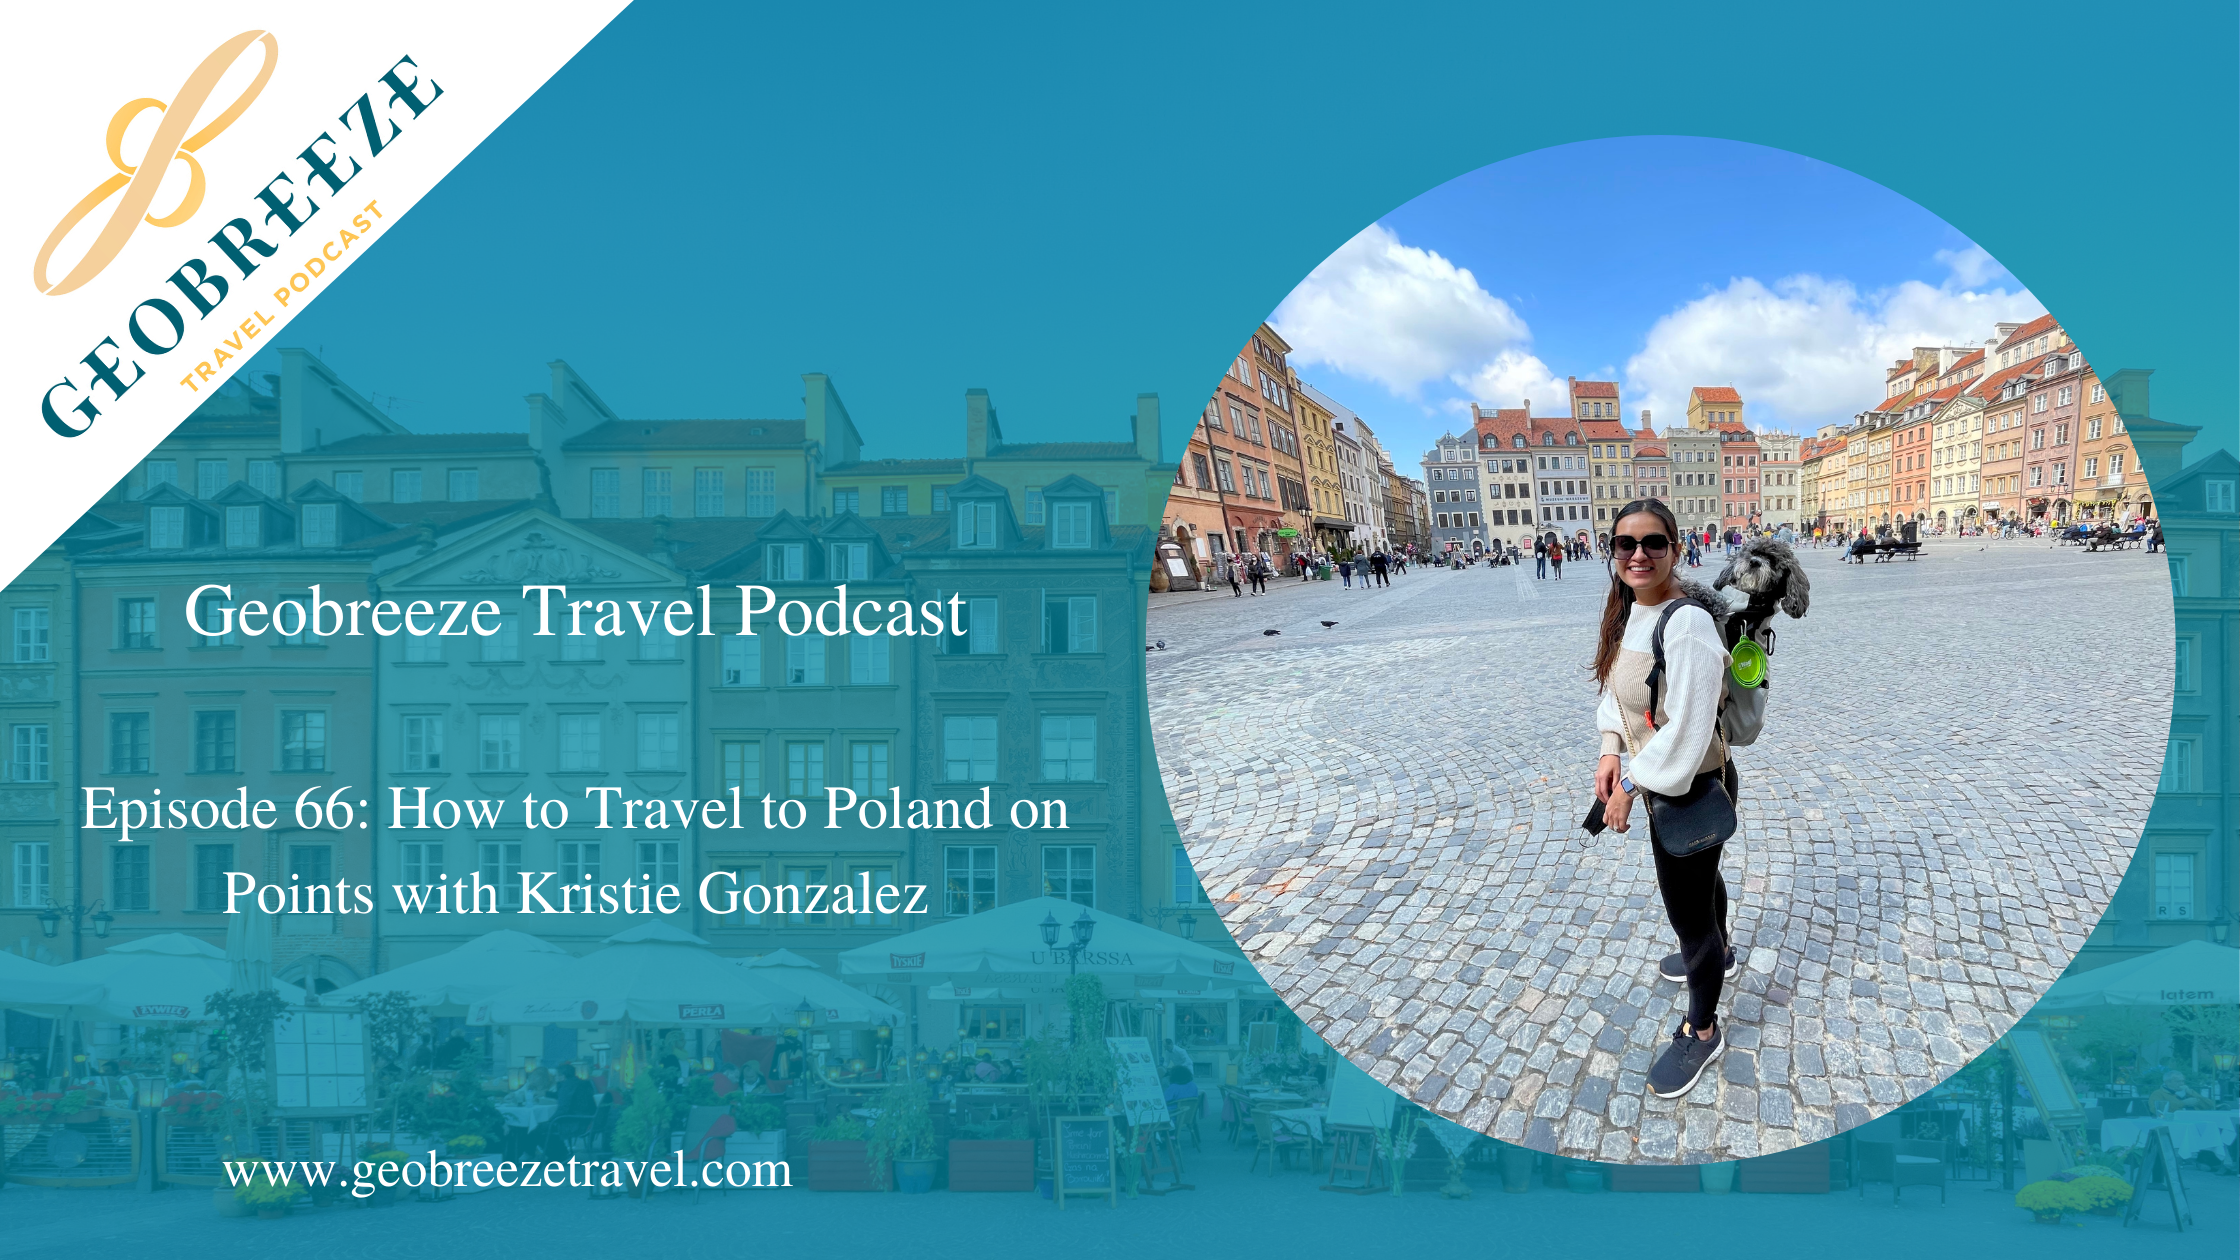 Episode 66: How to Travel to Poland on Points with Kristie Gonzalez